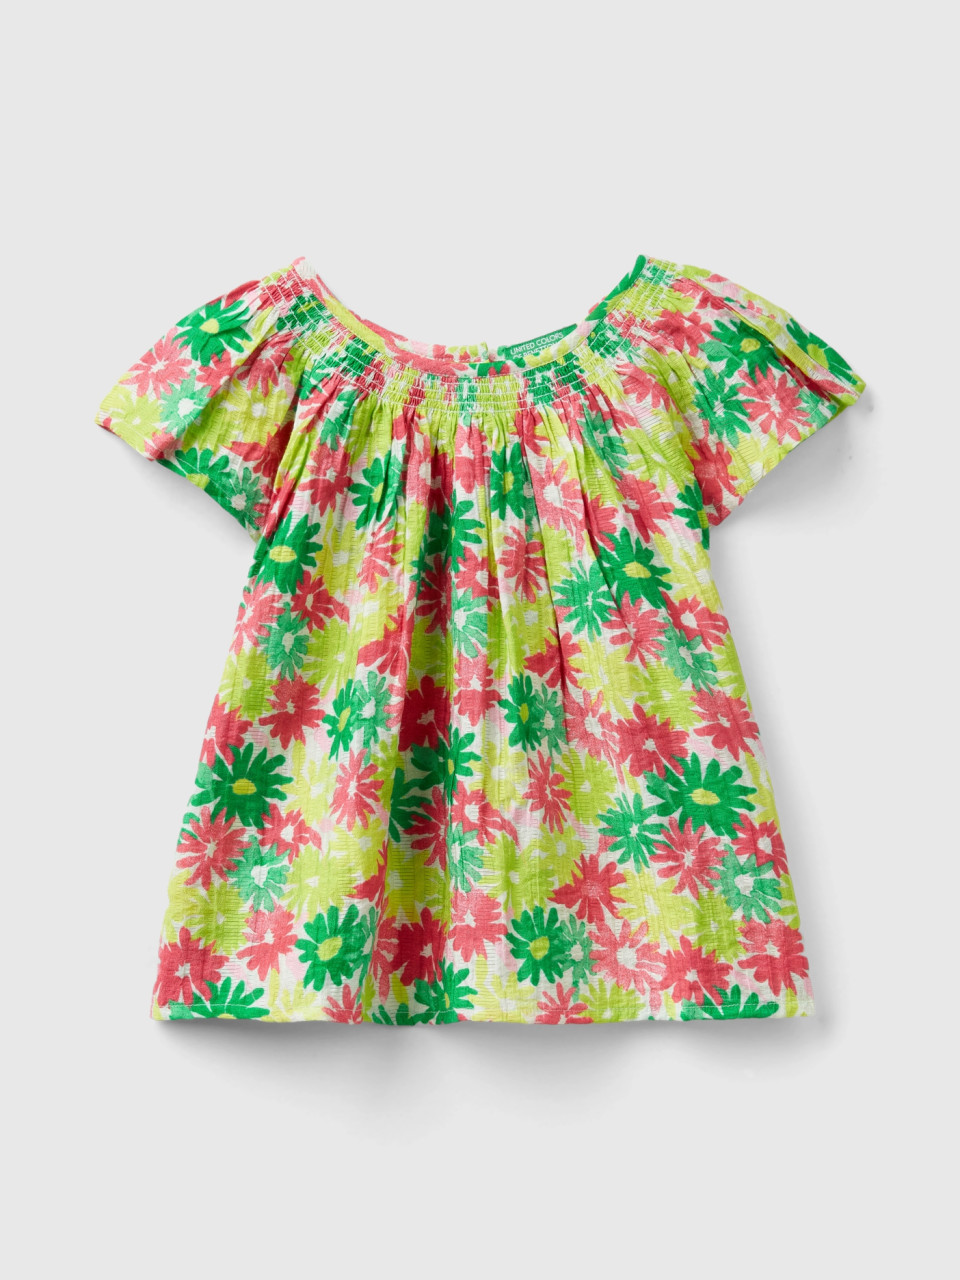 Benetton, Blouse With Floral Print, Multi-color, Kids